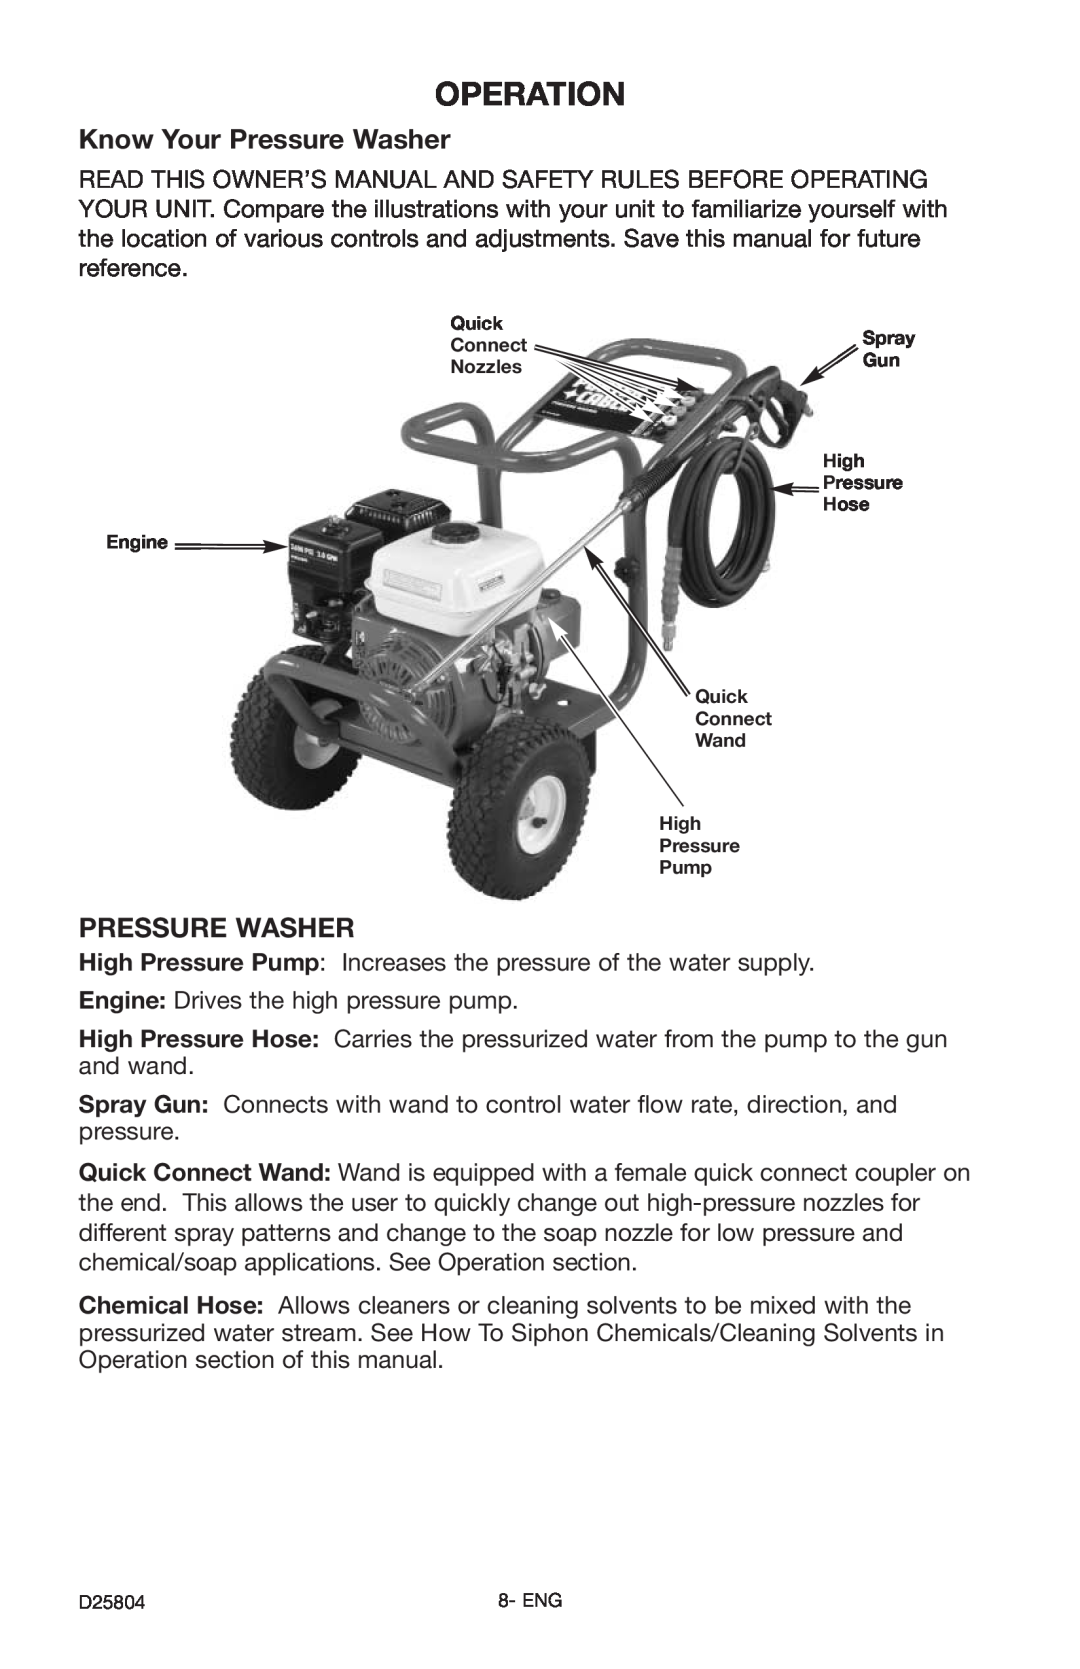 Porter-Cable D25804-025-1, PCH2600C instruction manual Operation, Know Your Pressure Washer 